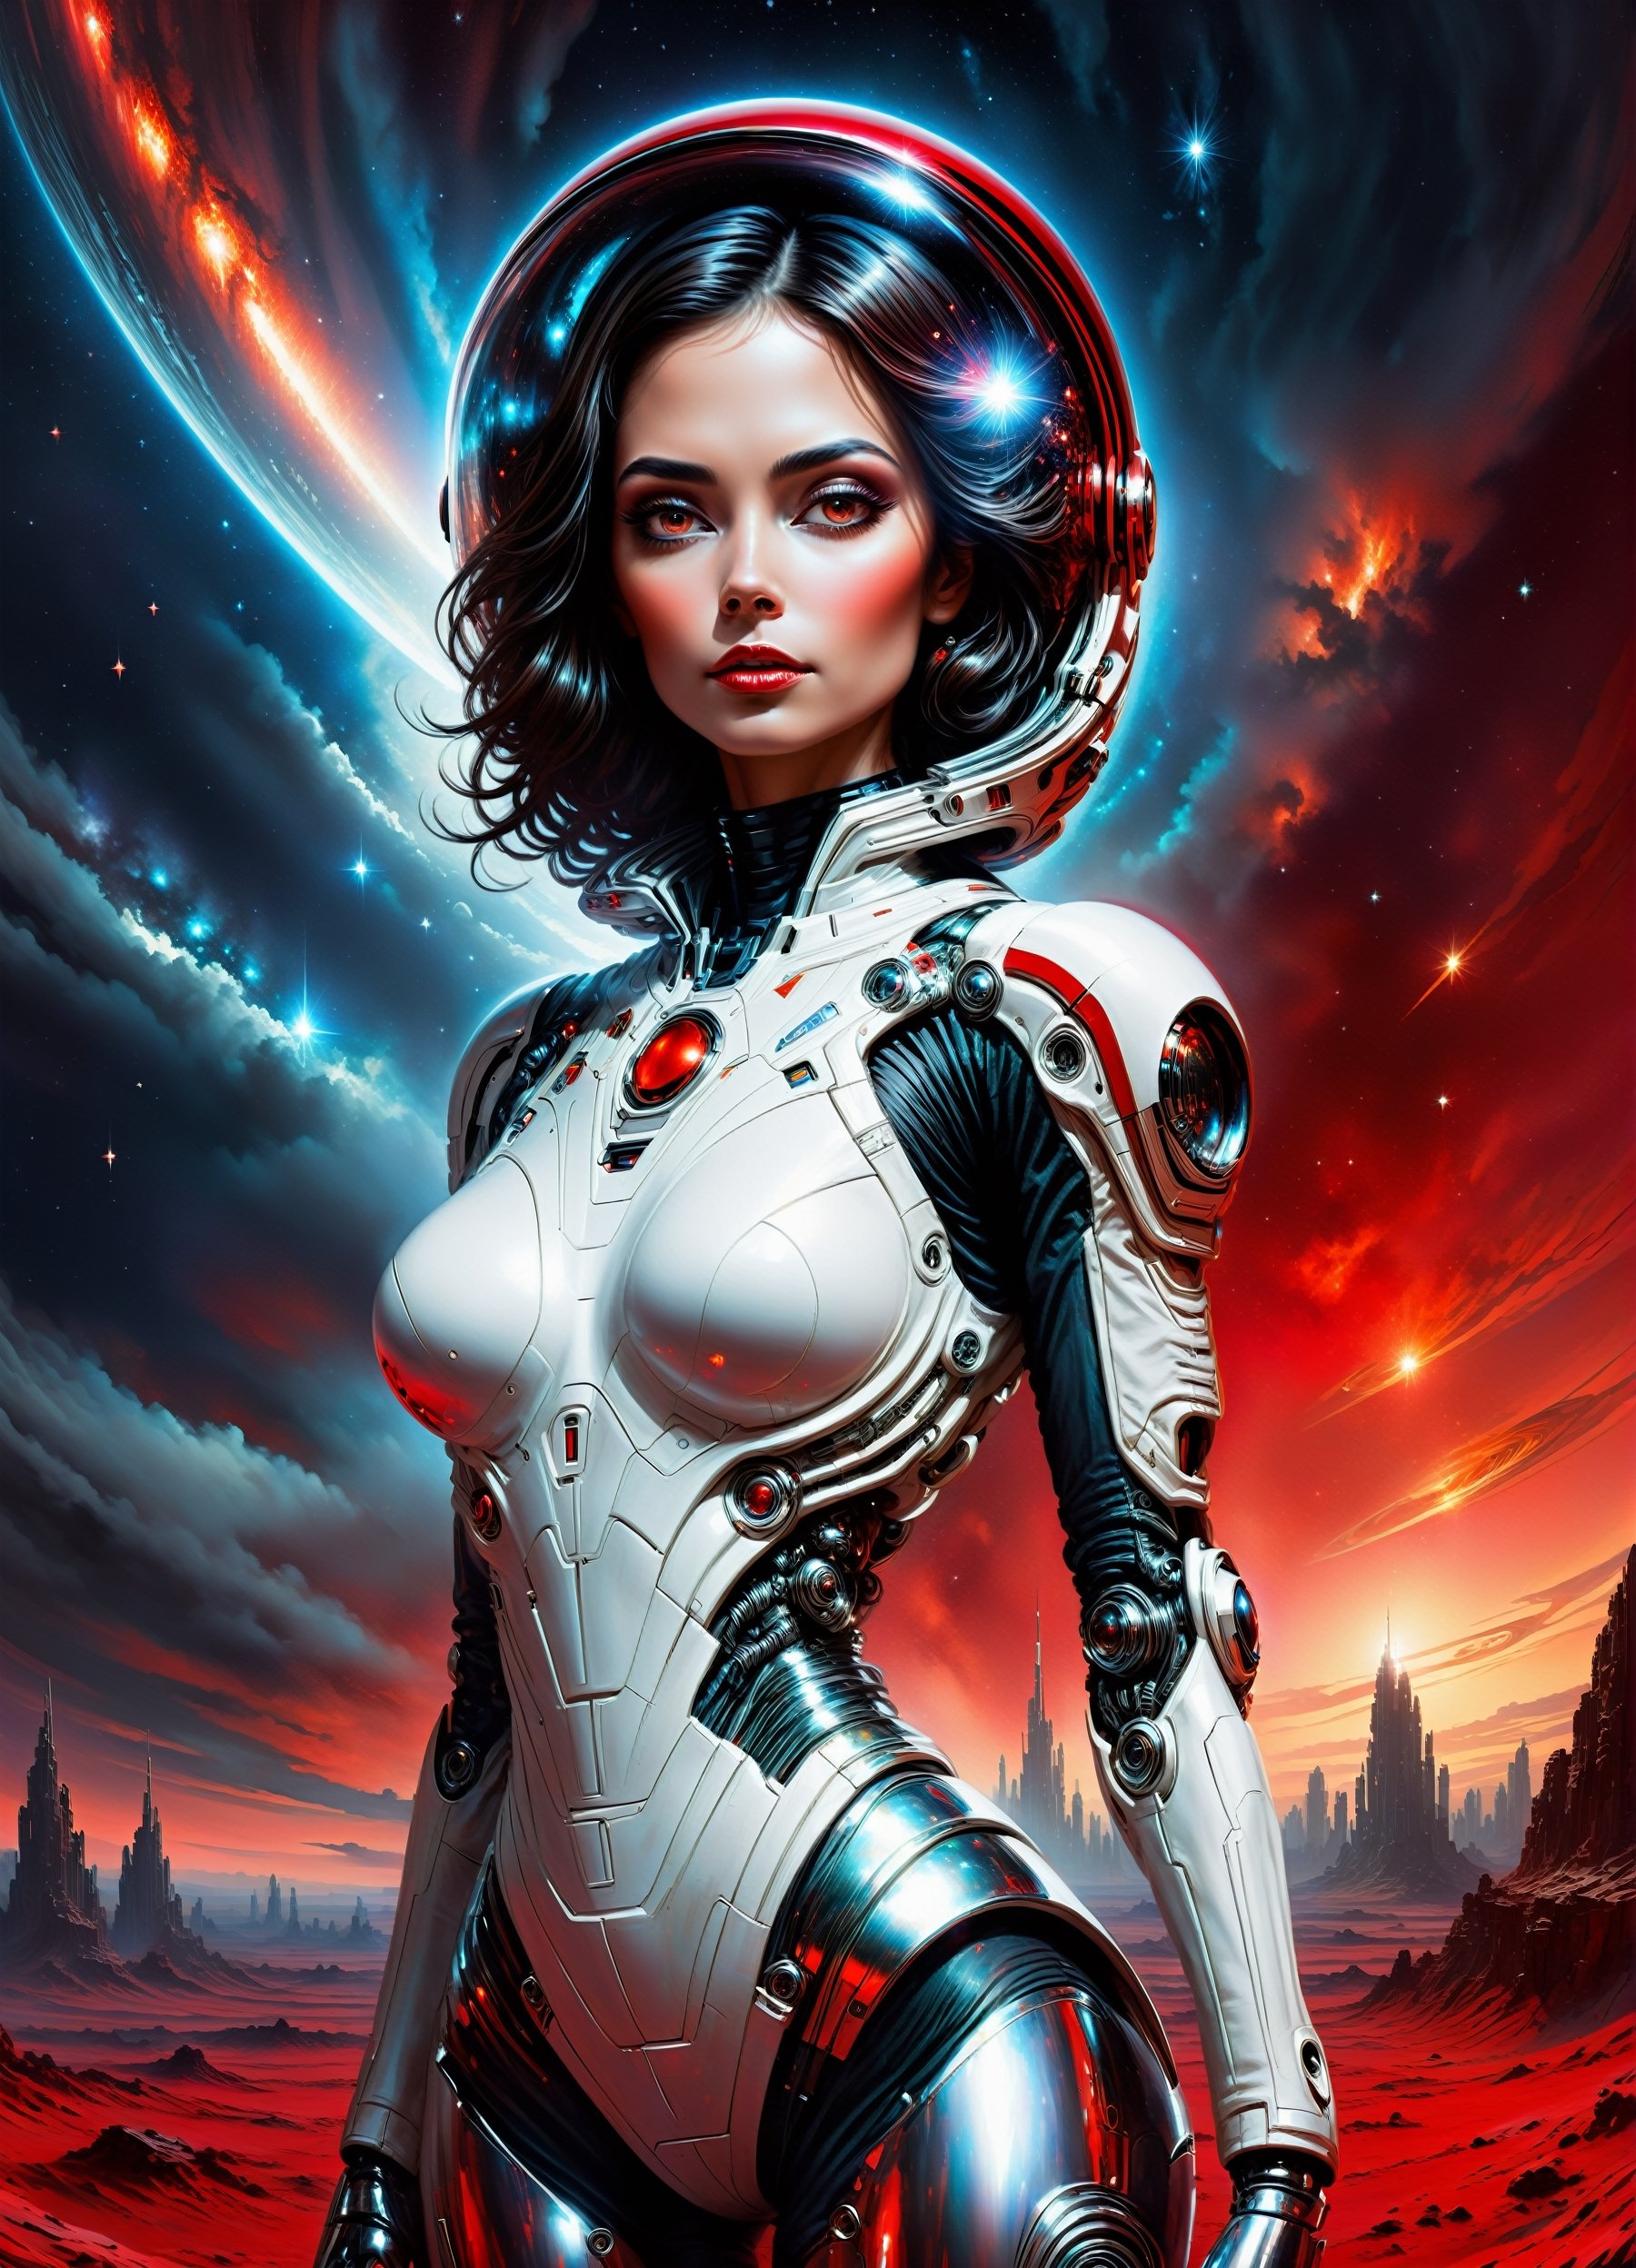 A futuristic femme fatale donning a sleek white jumpsuit, her piercing gaze locked on the horizon, as a red and black spaceship soars into the crimson-hued sky. In front of her, a metallic backdrop glimmers with silver and red hues, while in the distance, a megastructure's towering presence dominates the landscape. The AI astronaut's skeletal visage peers out from beneath her helmet, her cybernetic eyes gleaming like polished chrome. With Frank Frazetta's bold brushstrokes and Sakimichan's intricate details, this portrait of an android beauty shines like a star in the vast expanse.